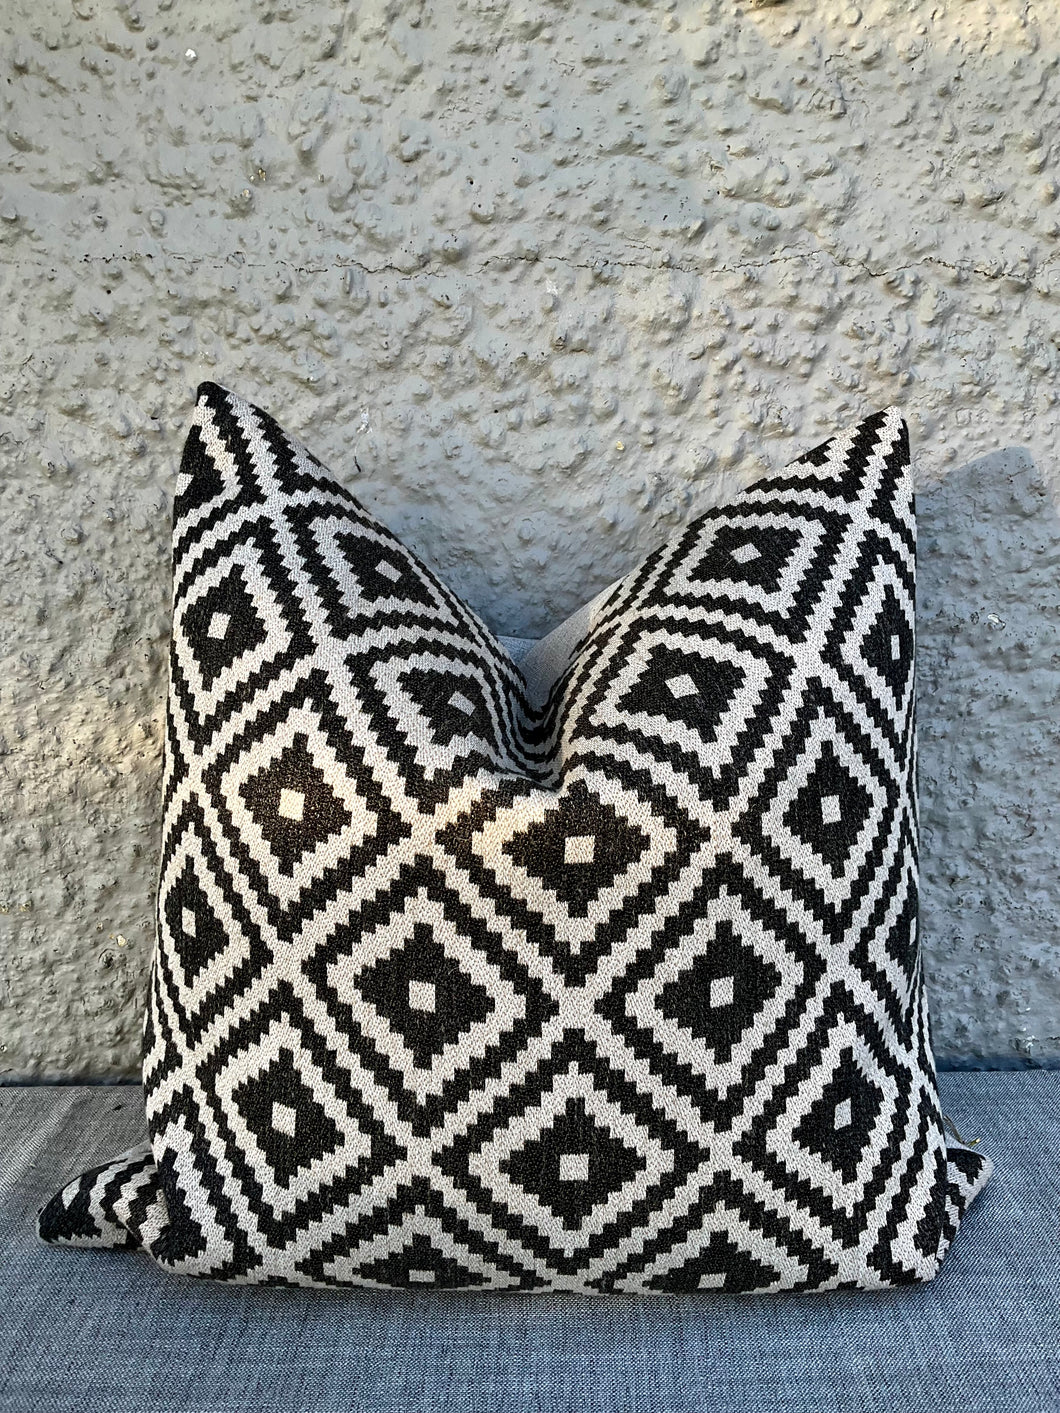 Patterned Charcoal Cushion